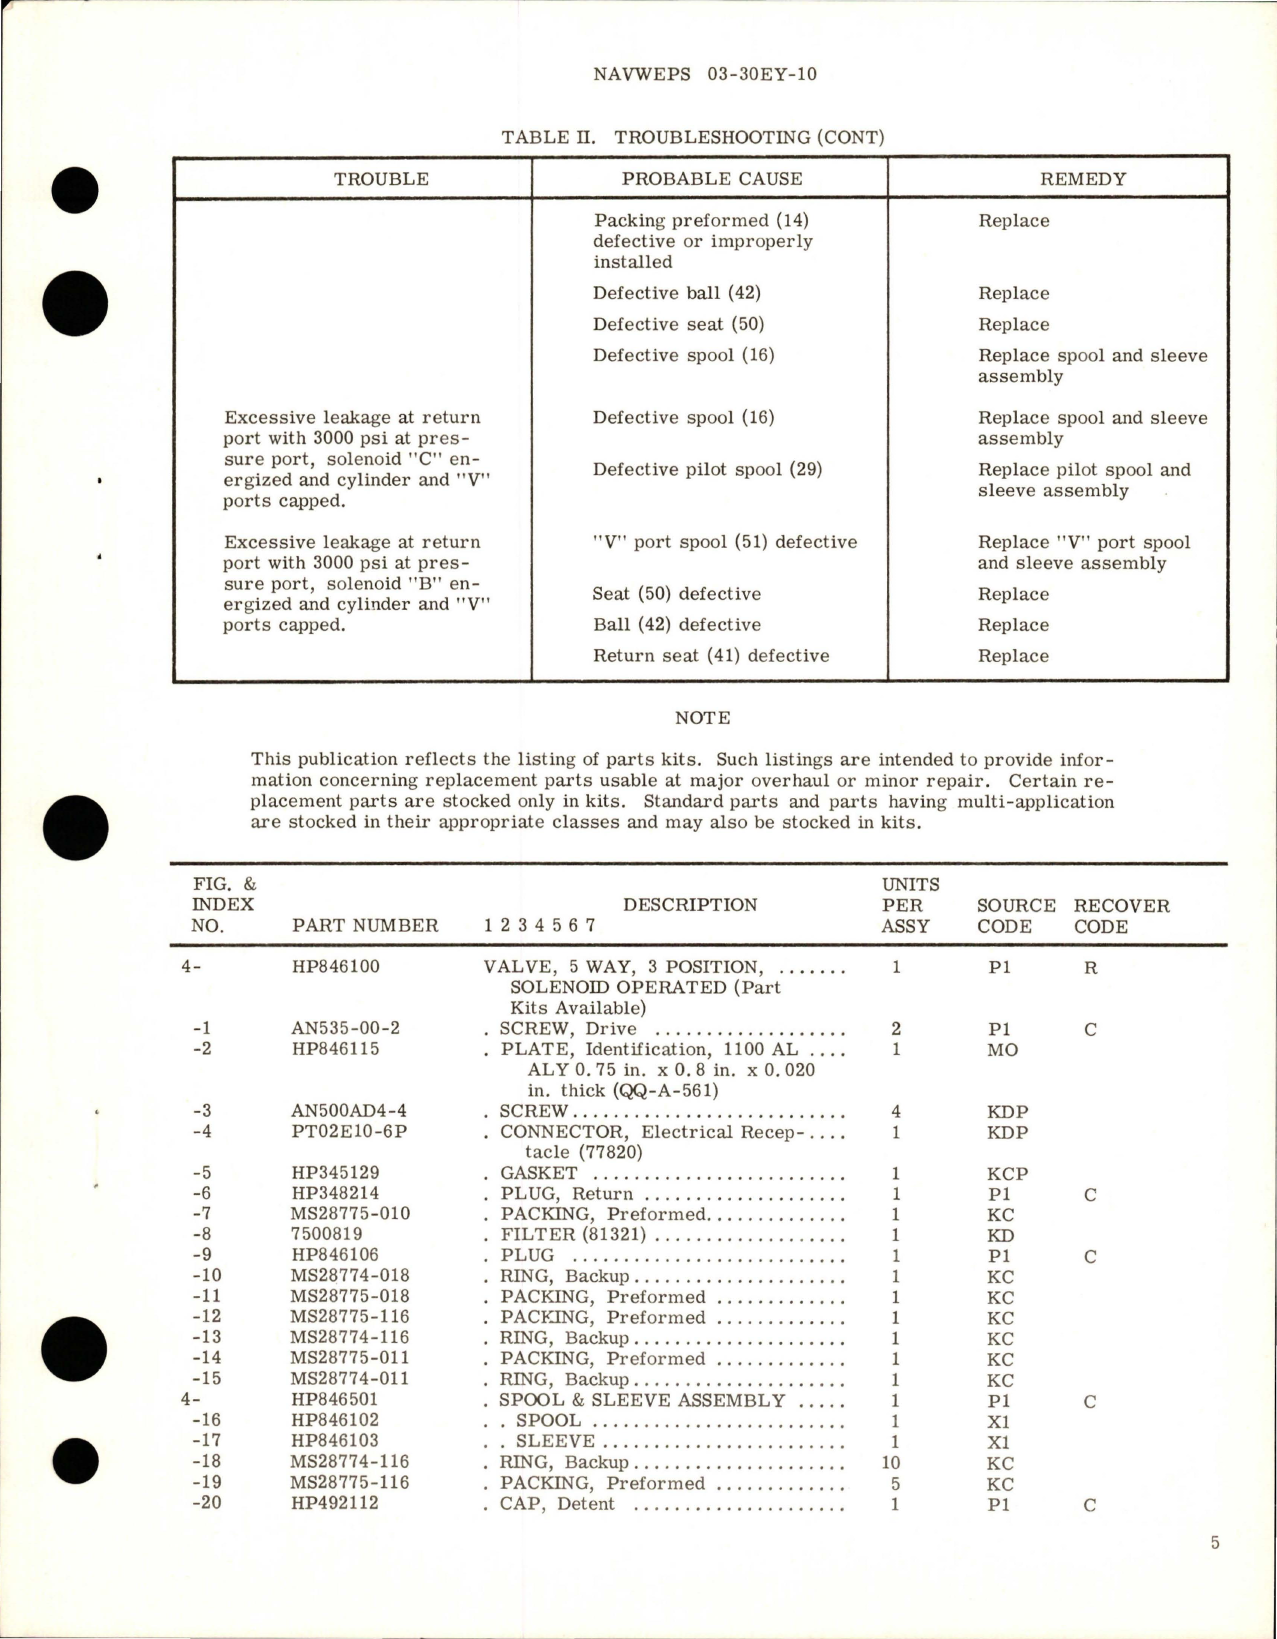 Sample page 5 from AirCorps Library document: Overhaul Instructions with Parts for Solenoid Operated Valve - Part HP 846100